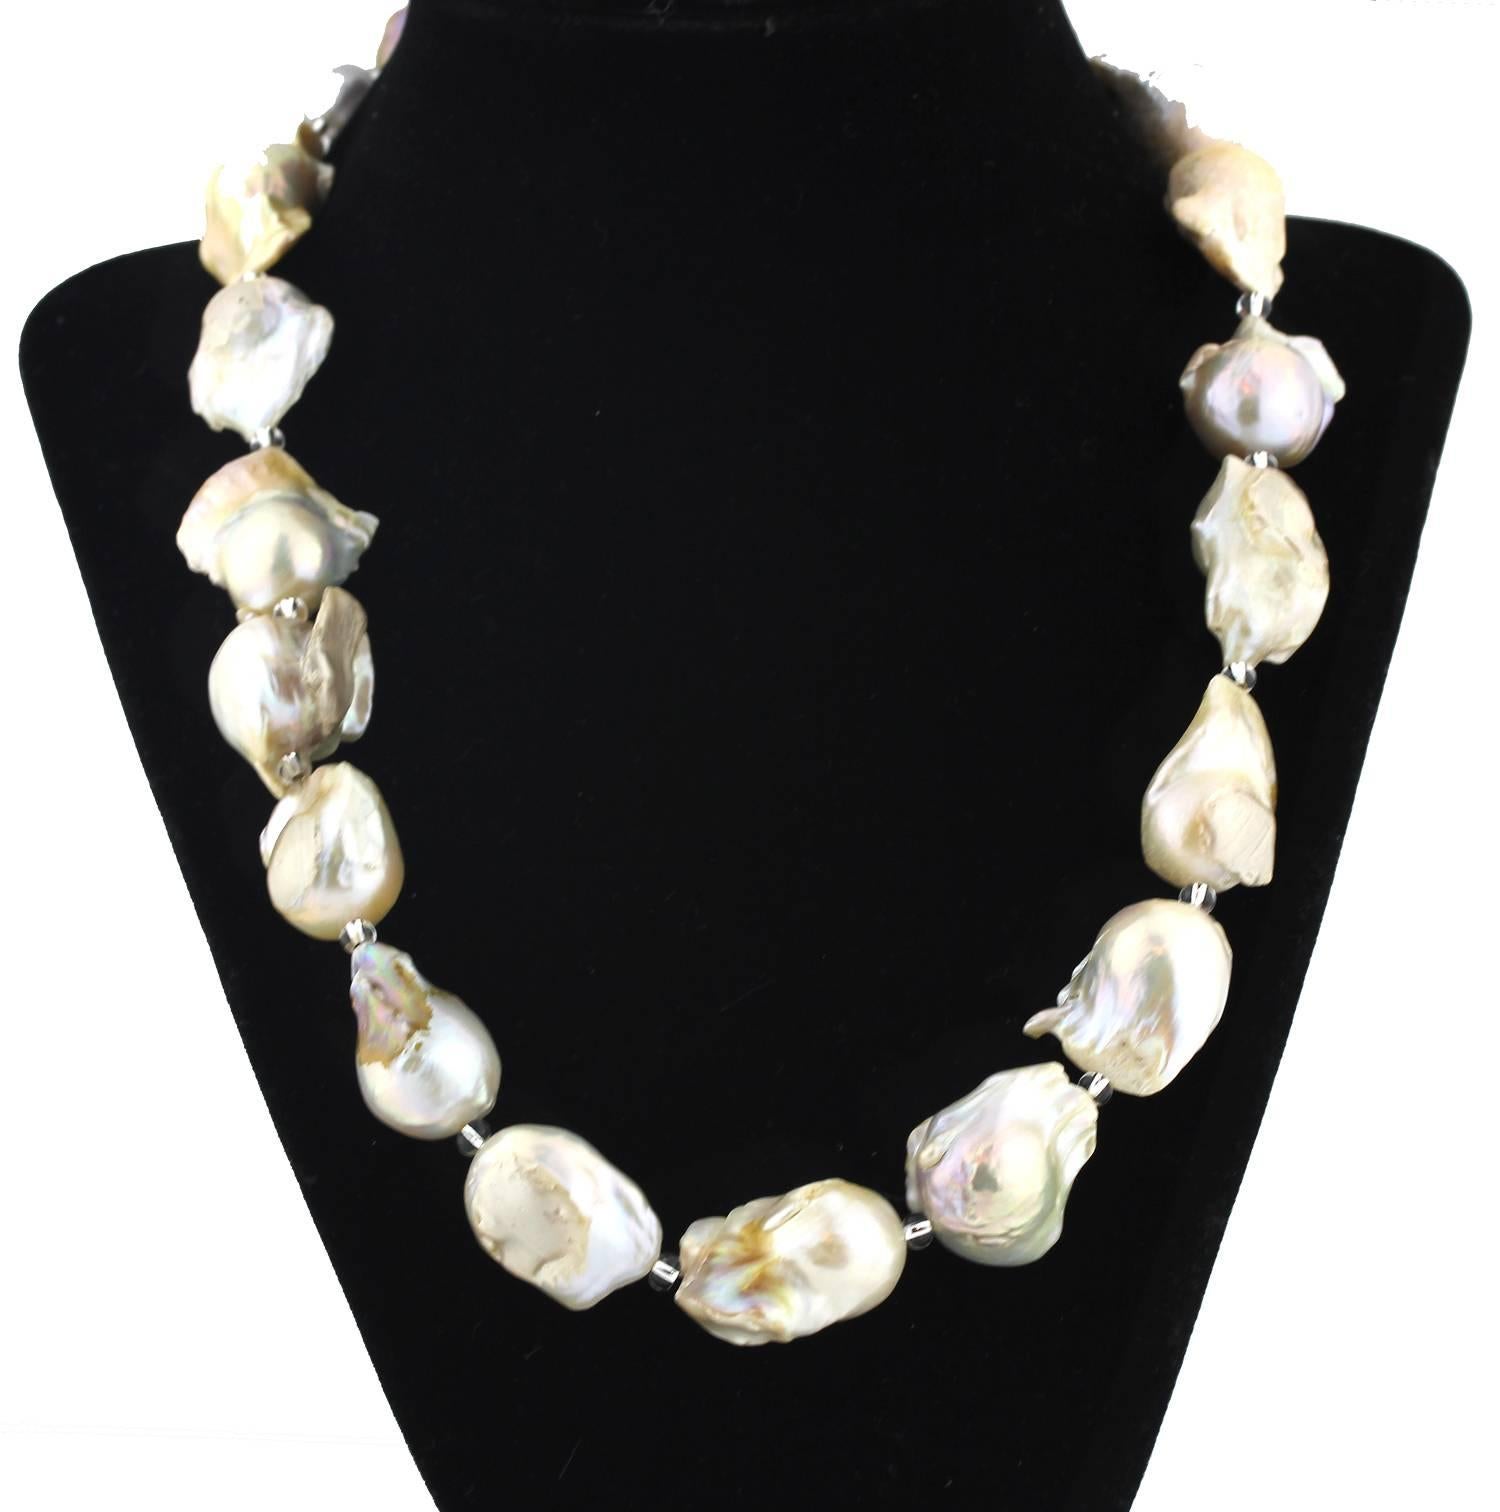 These goldy tone unique Baroque Pearls are the natural color of the nacre from the shell that created them on this handmade necklace.  
Size:  approximately 17 mm;  Length:  20 inches;  Clasp: diamonds set in sterling silver.  
